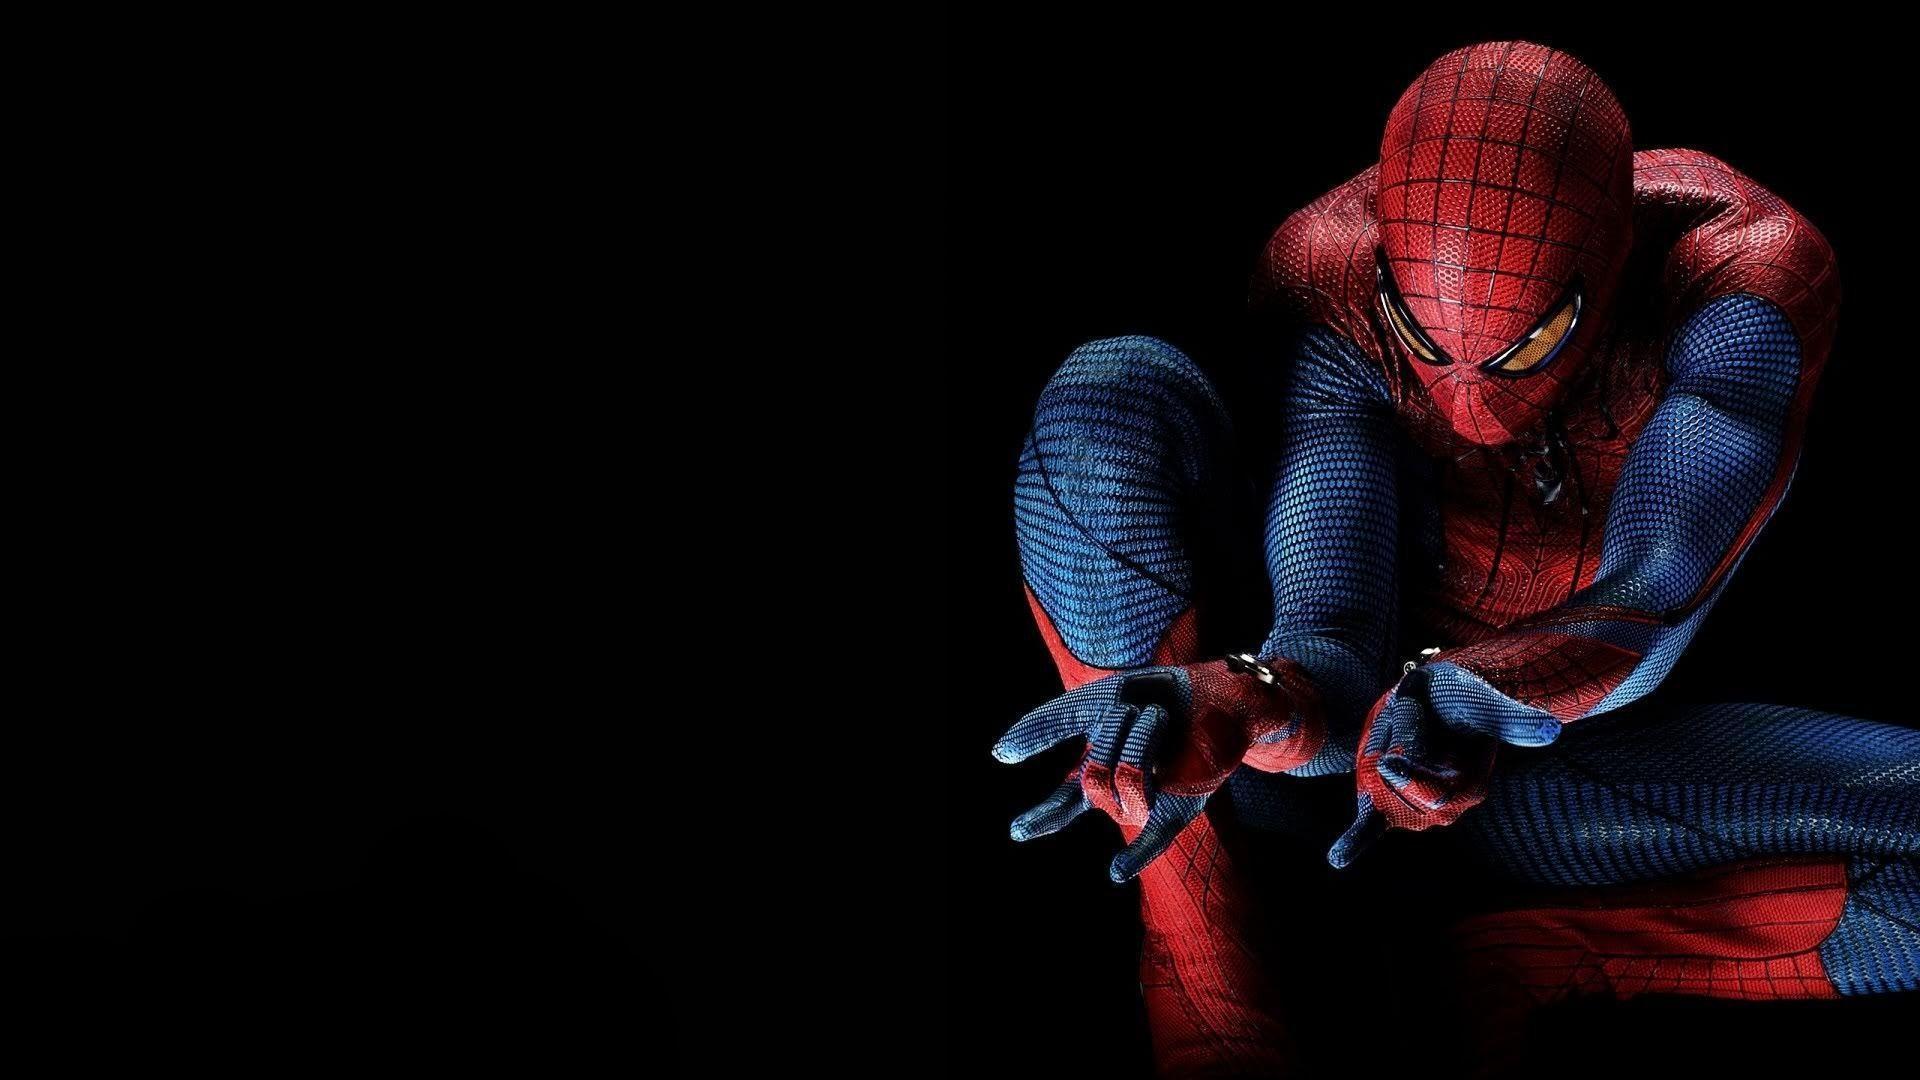 Spiderman Black Backgrounds For Computer Widescreen